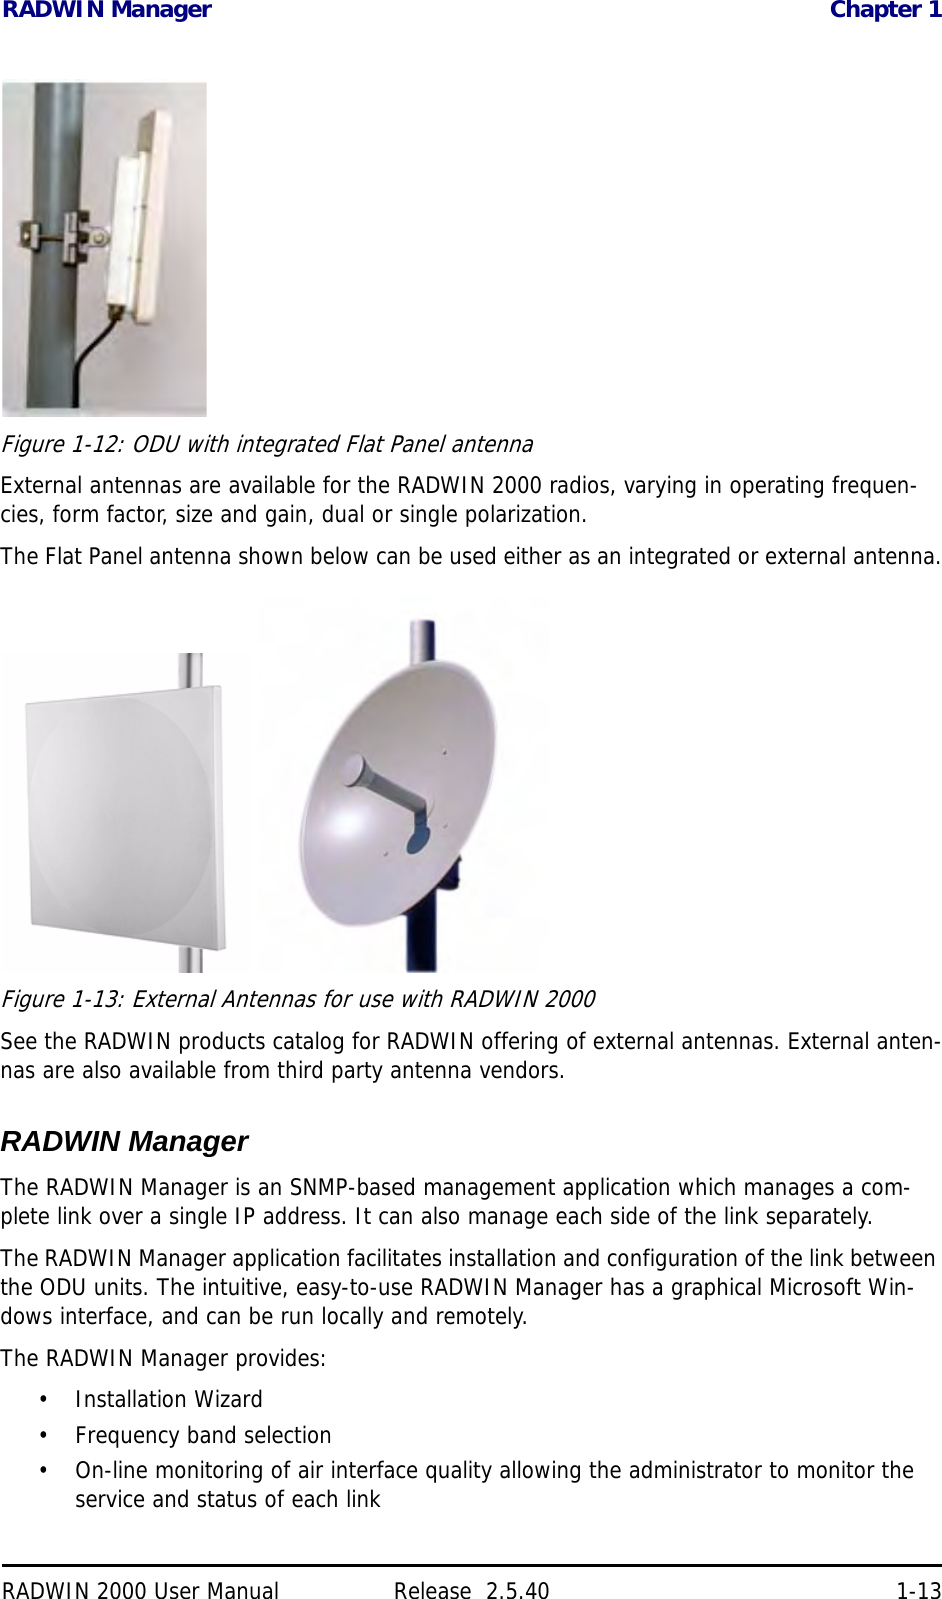 RADWIN Manager Chapter 1RADWIN 2000 User Manual Release  2.5.40 1-13Figure 1-12: ODU with integrated Flat Panel antennaExternal antennas are available for the RADWIN 2000 radios, varying in operating frequen-cies, form factor, size and gain, dual or single polarization.The Flat Panel antenna shown below can be used either as an integrated or external antenna. Figure 1-13: External Antennas for use with RADWIN 2000See the RADWIN products catalog for RADWIN offering of external antennas. External anten-nas are also available from third party antenna vendors.RADWIN ManagerThe RADWIN Manager is an SNMP-based management application which manages a com-plete link over a single IP address. It can also manage each side of the link separately.The RADWIN Manager application facilitates installation and configuration of the link between the ODU units. The intuitive, easy-to-use RADWIN Manager has a graphical Microsoft Win-dows interface, and can be run locally and remotely. The RADWIN Manager provides:• Installation Wizard• Frequency band selection• On-line monitoring of air interface quality allowing the administrator to monitor the service and status of each link